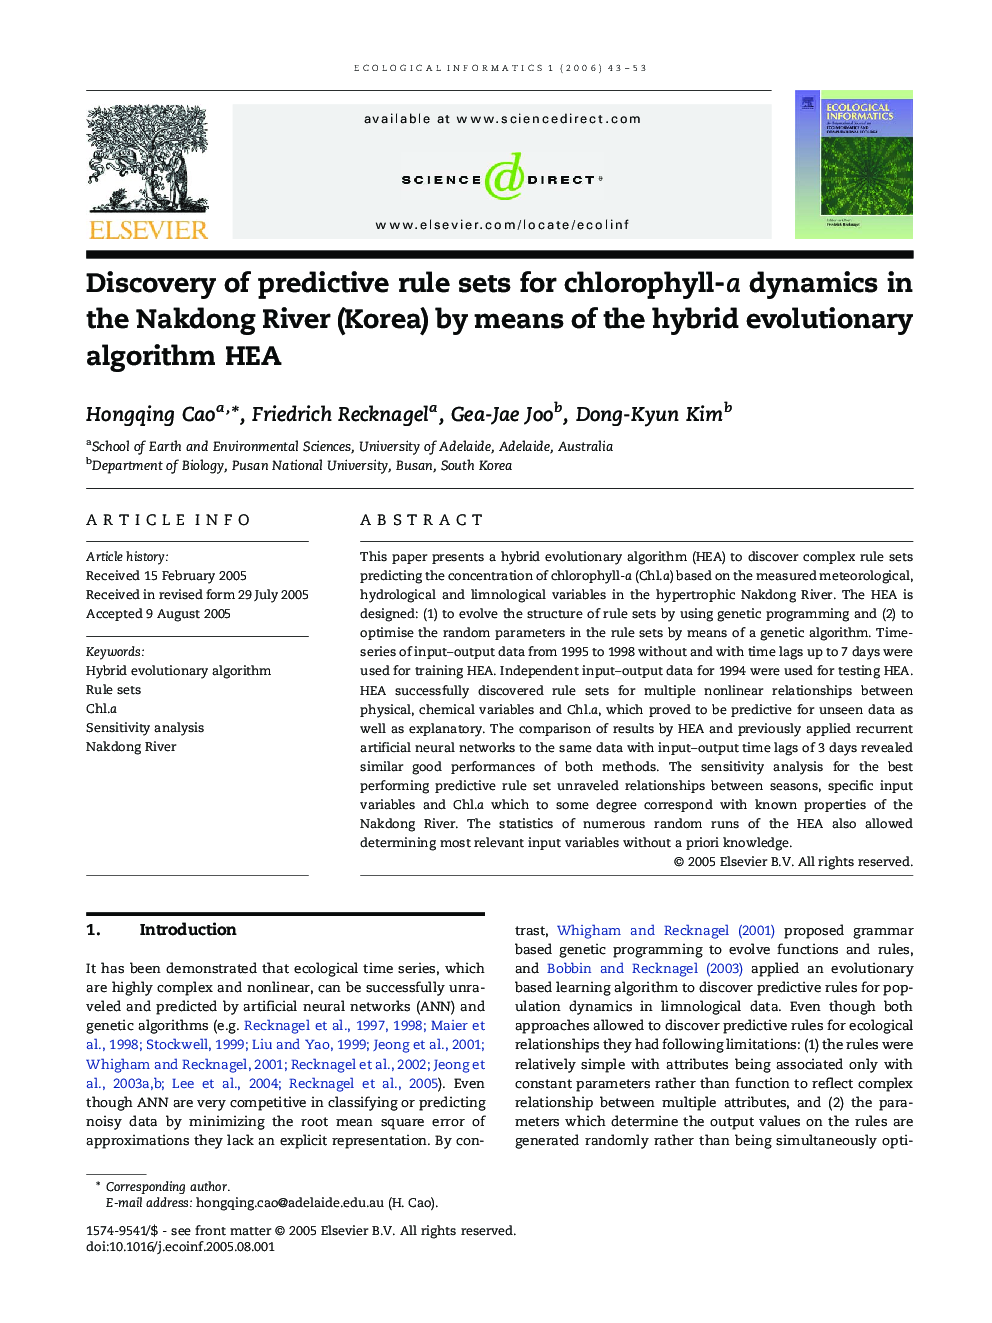 Discovery of predictive rule sets for chlorophyll-a dynamics in the Nakdong River (Korea) by means of the hybrid evolutionary algorithm HEA